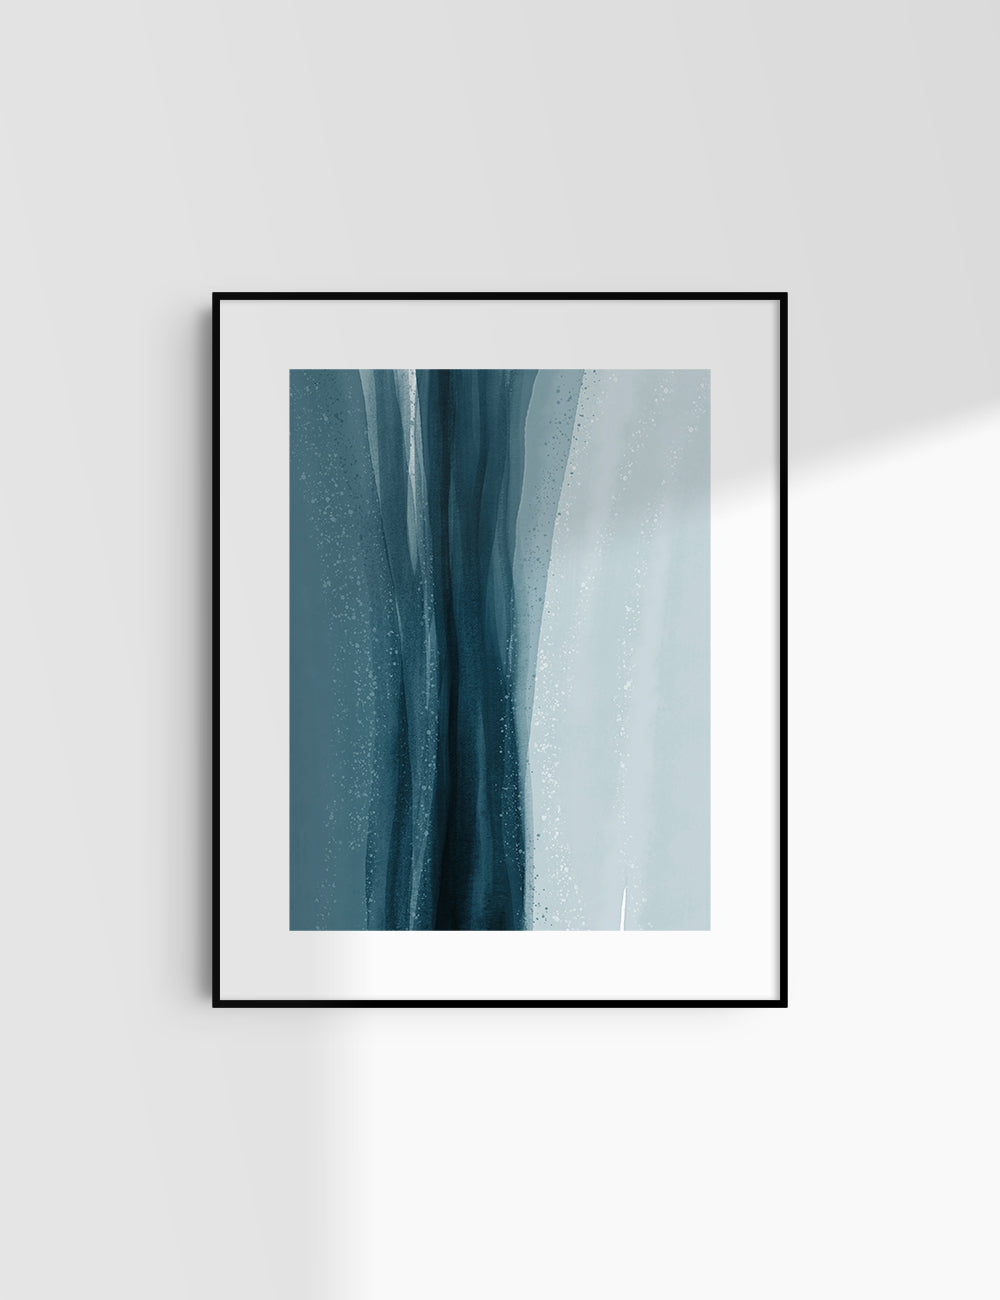 WATERCOLOR ABSTRACT. Blue Aesthetic. Abstract Watercolor Painting. Printable Wall Art. - PAPER MOON Art & Design